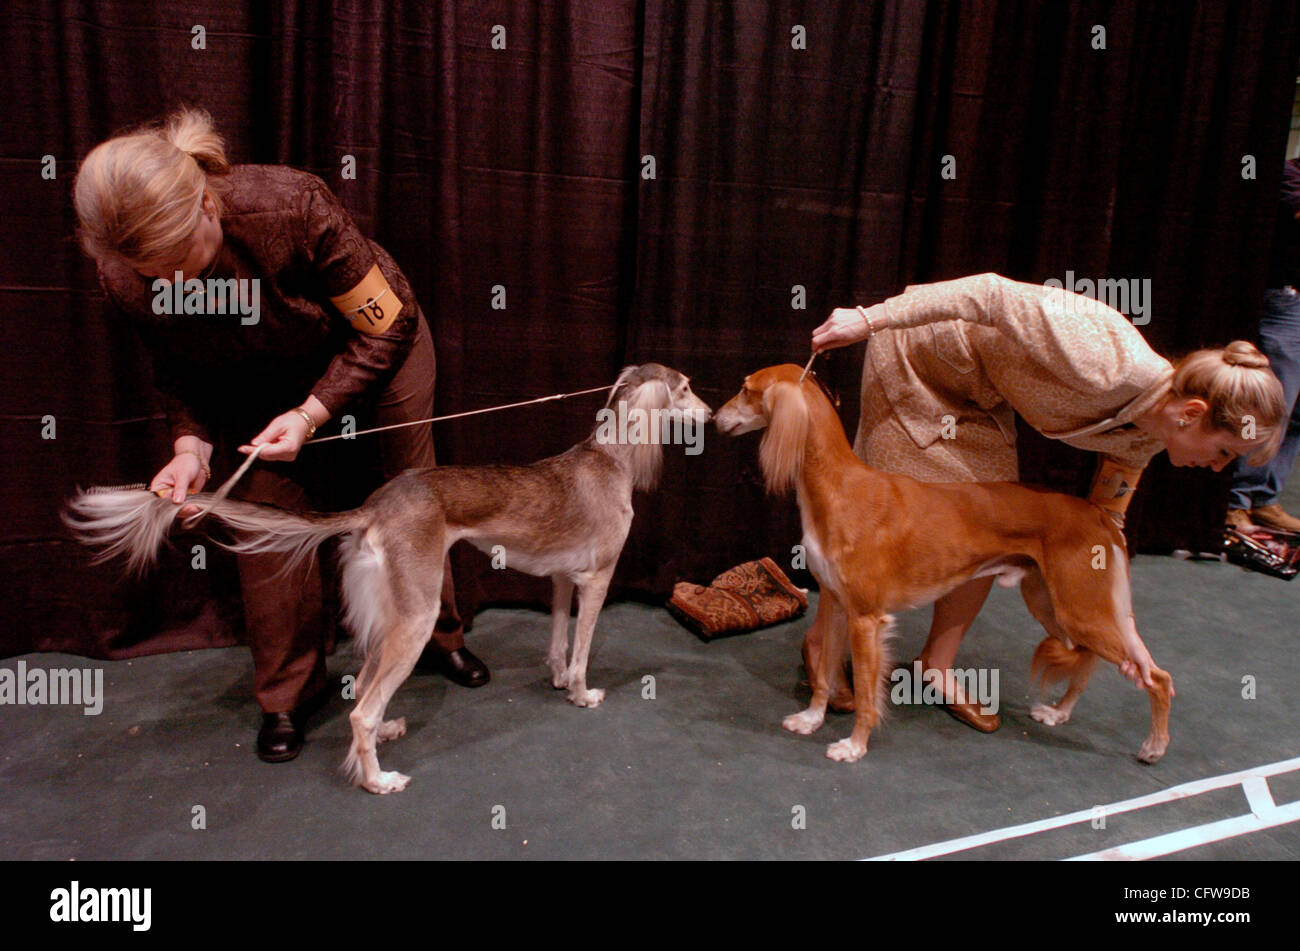 Dog handlers Cynthia Najera (L) with Feather, 5 yrs. old, a Saluki and Suzanne Forsythe (R) with Parker, 3, also a Saluki, put final grooming touches to their dogs before competition at the at the 131st Annual Westminster Kennel Club dog show at Madison Square Garden. Stock Photo